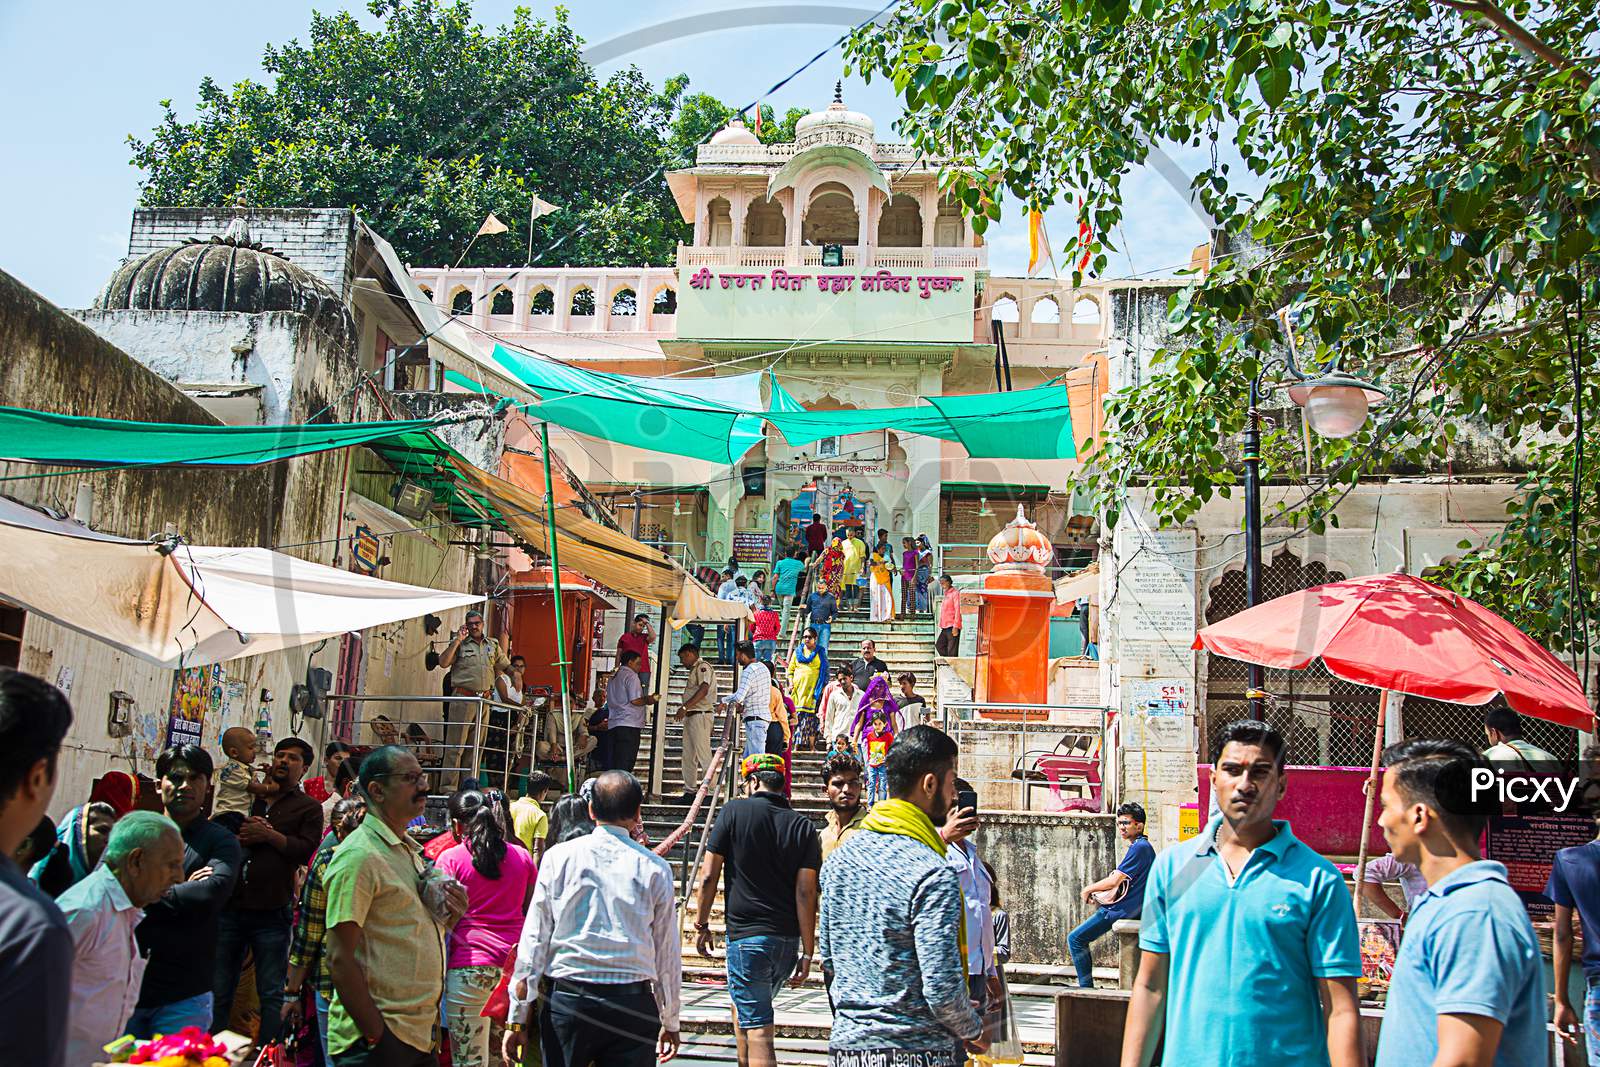 Pushkar, Rajasthan, India - November 14, 2019: Street View With Of Jagatpita Brahma Mandir Is A Hindu Temple Situated At Pushkar In The Indian State Of Rajasthan, Crowd Walking All Round The Street And Temple.